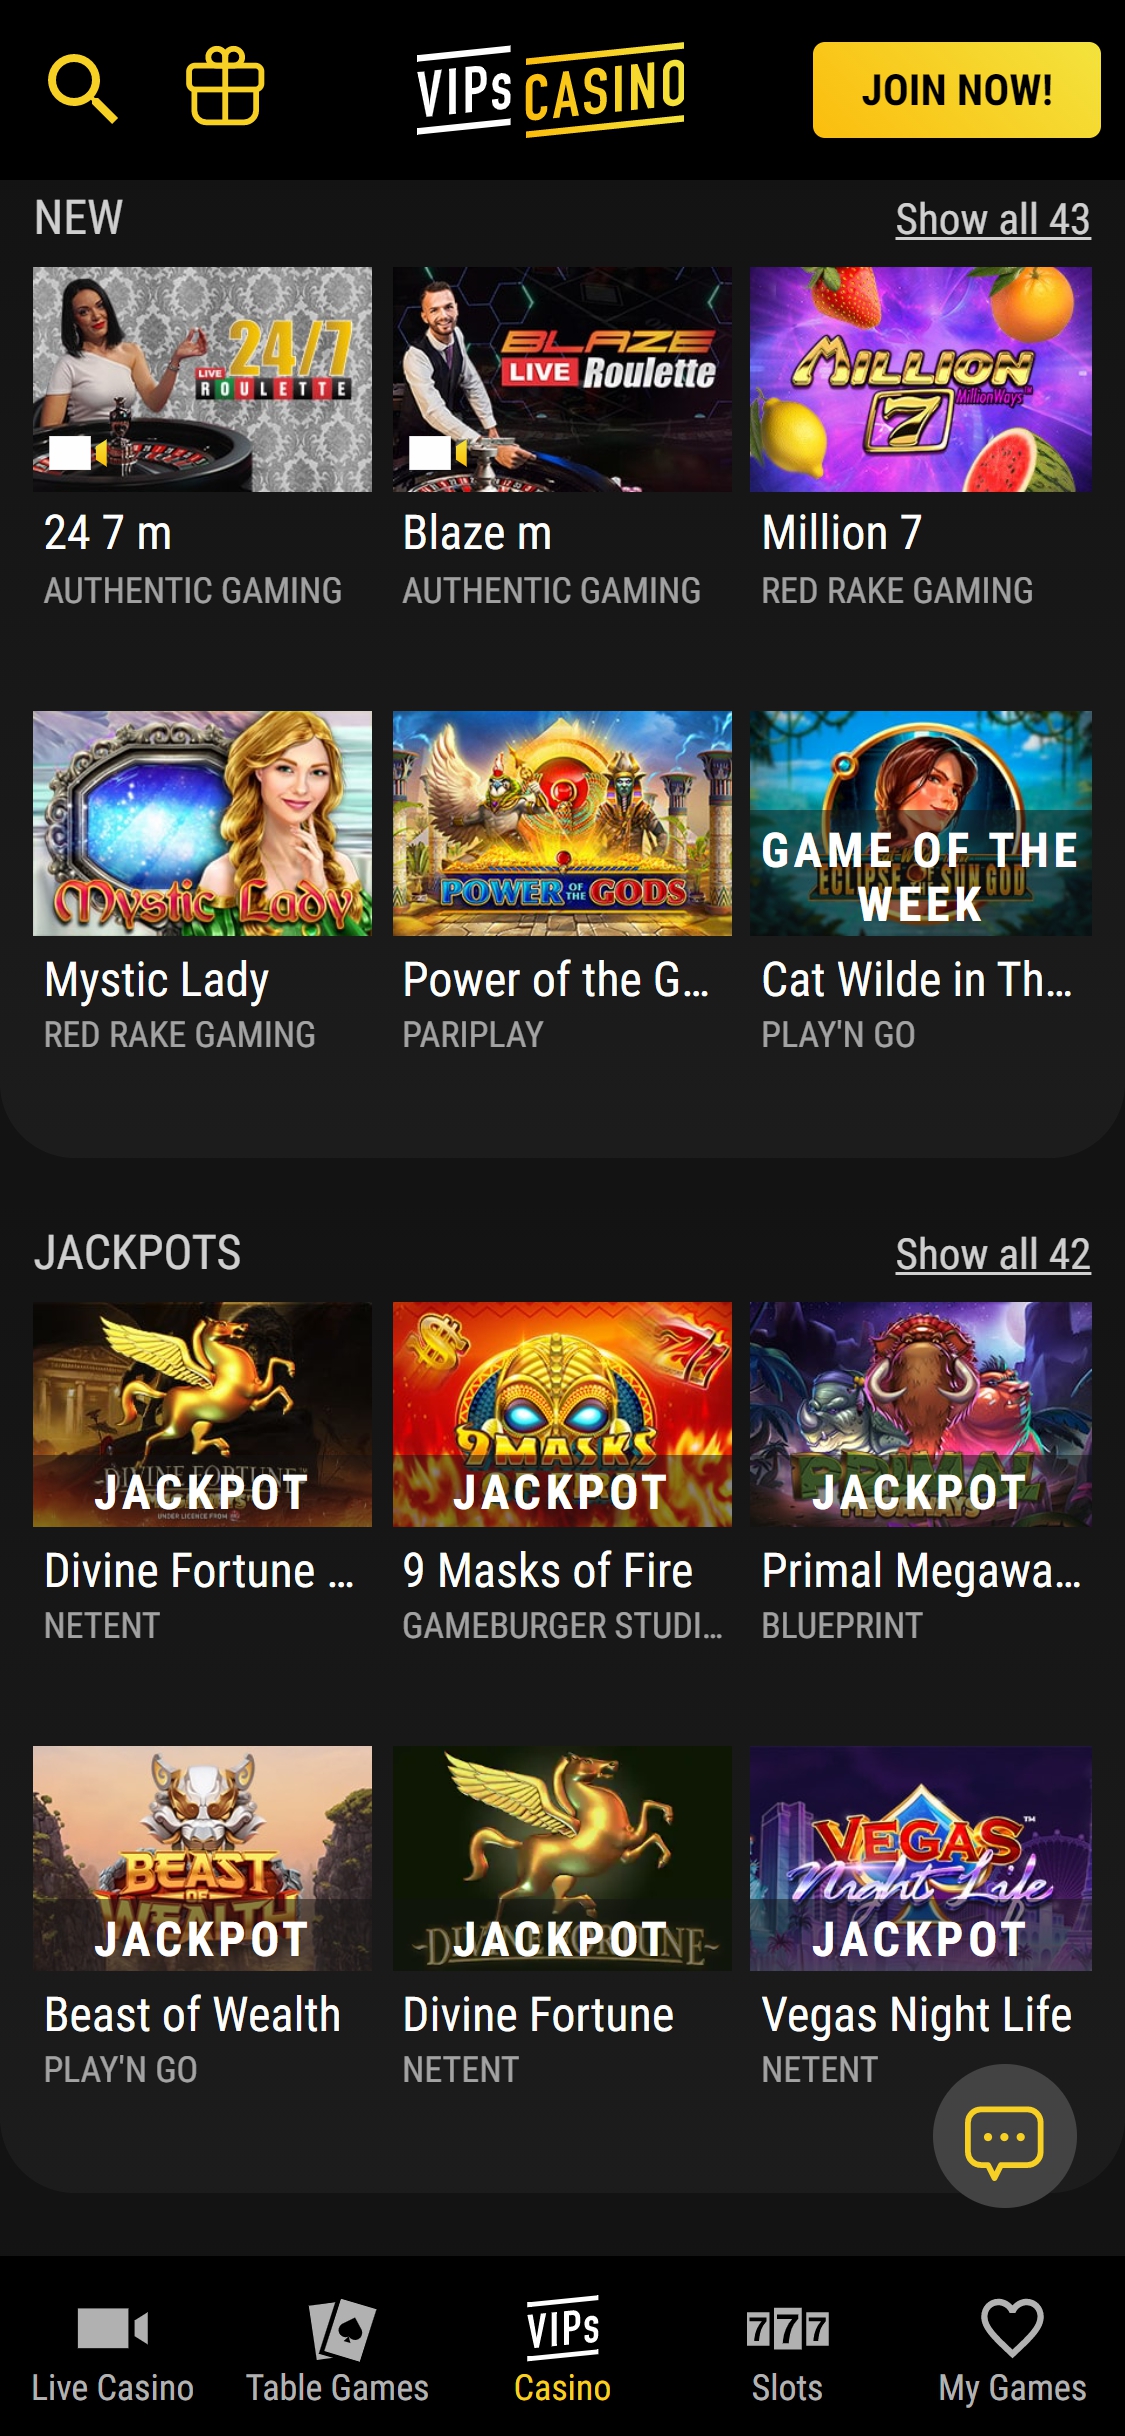 VIPs Casino Mobile Games Review